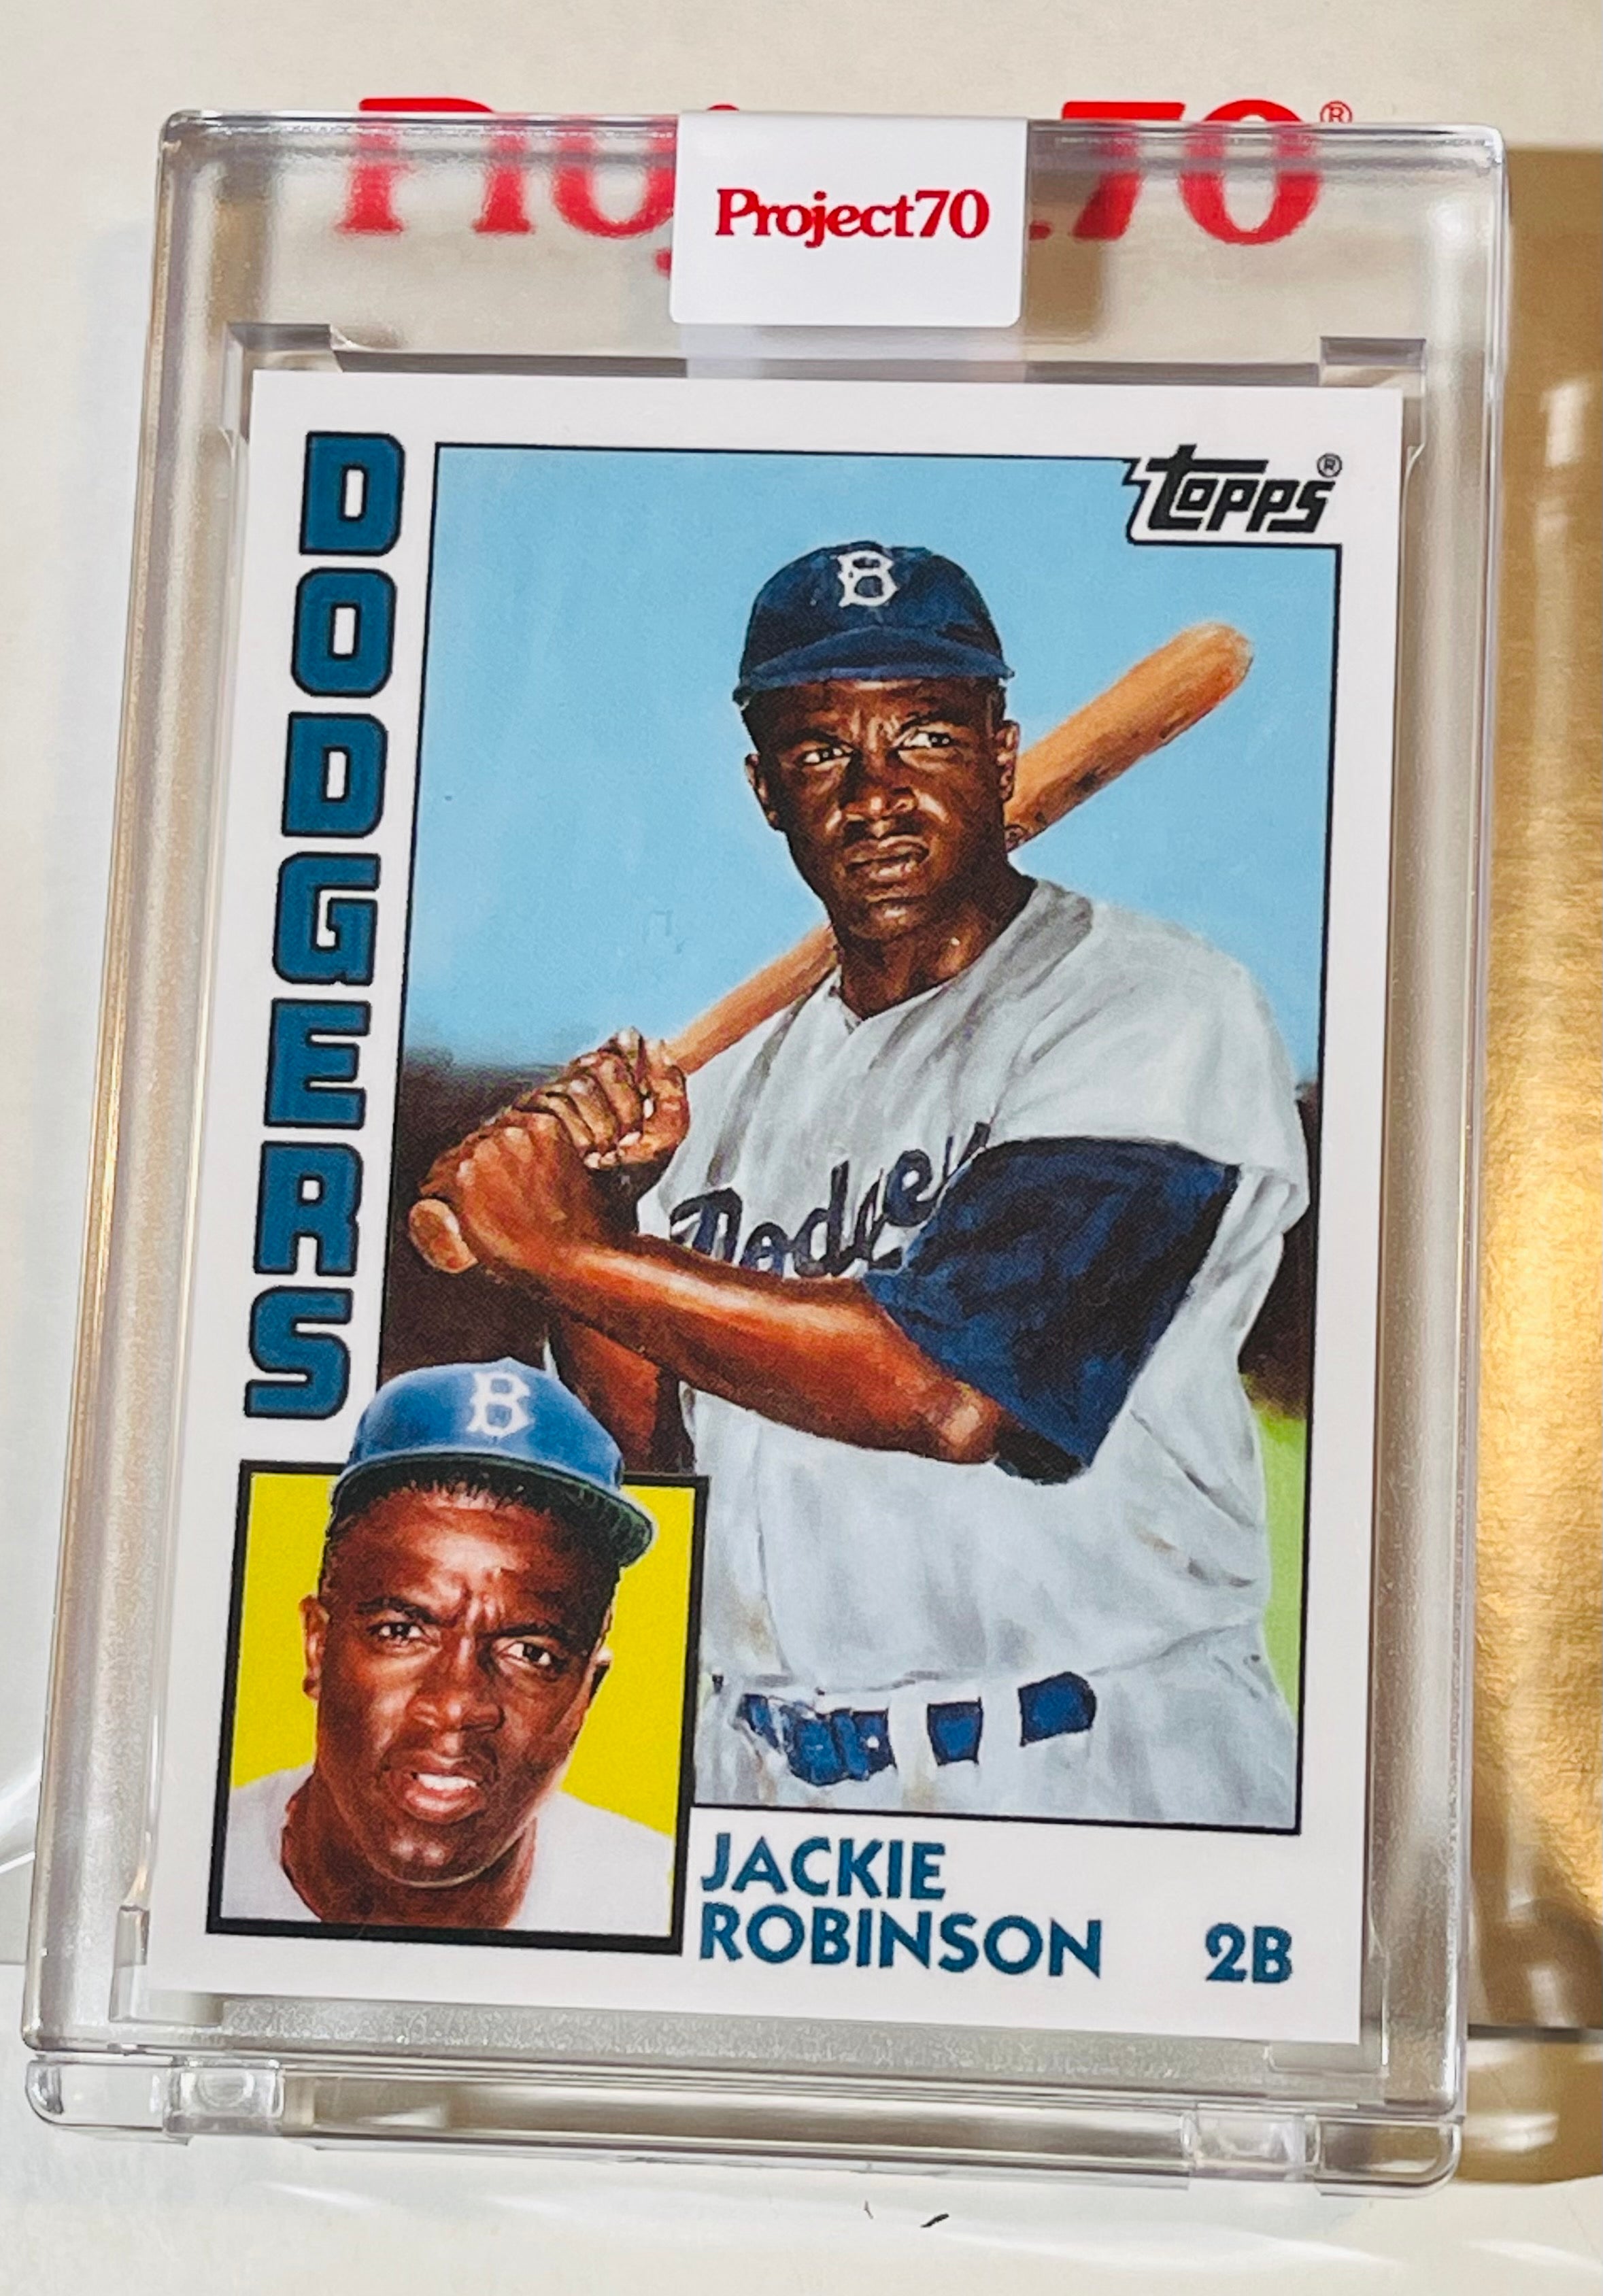 Jackie Robinson Topps project 70 limited issued baseball card